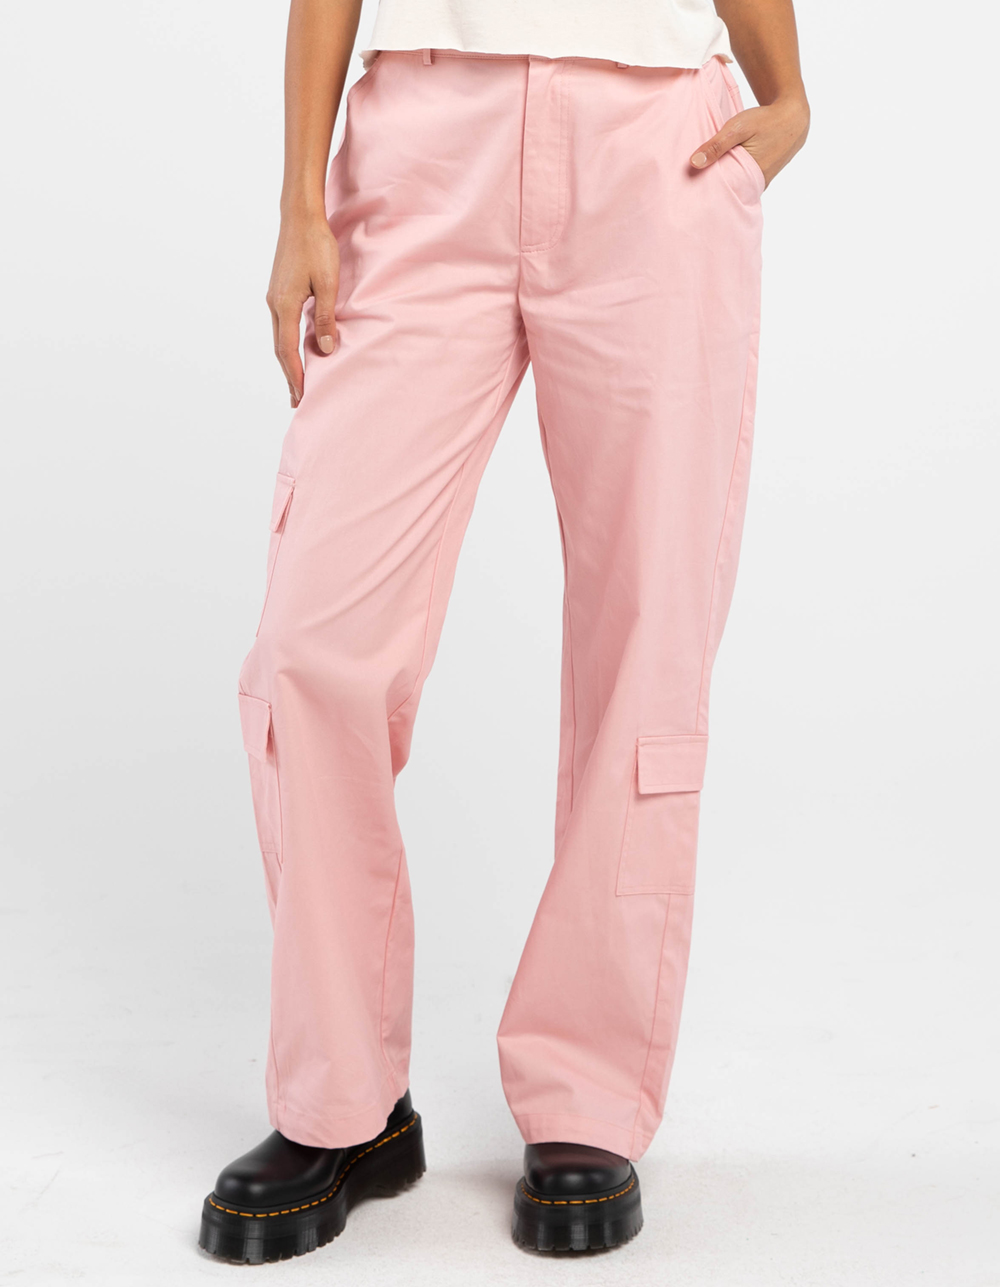 Buy Gap Cargo Trousers from the Gap online shop